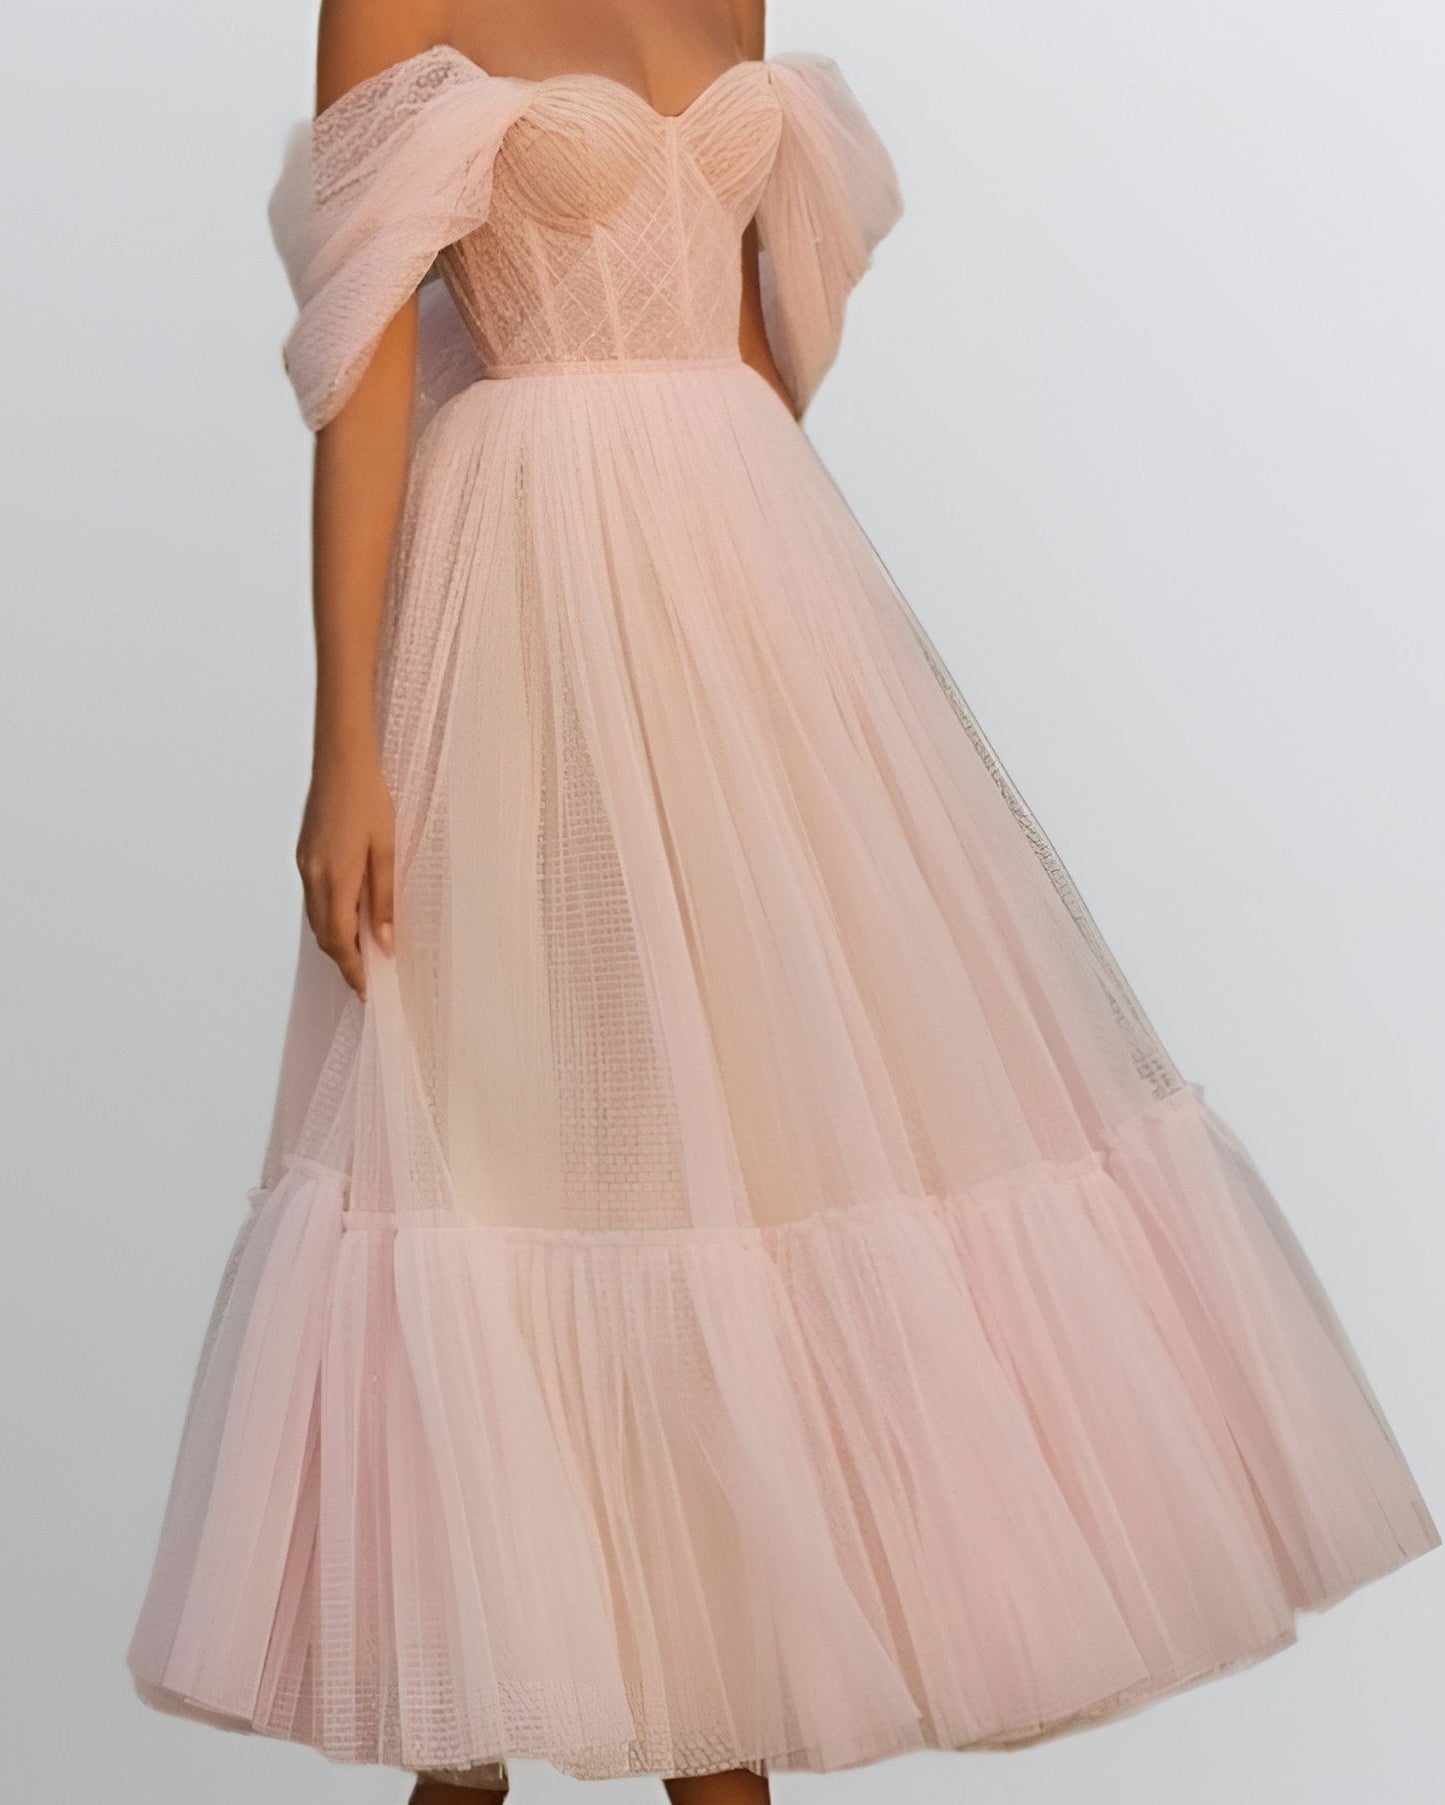 KELLY Formal Couture Dress